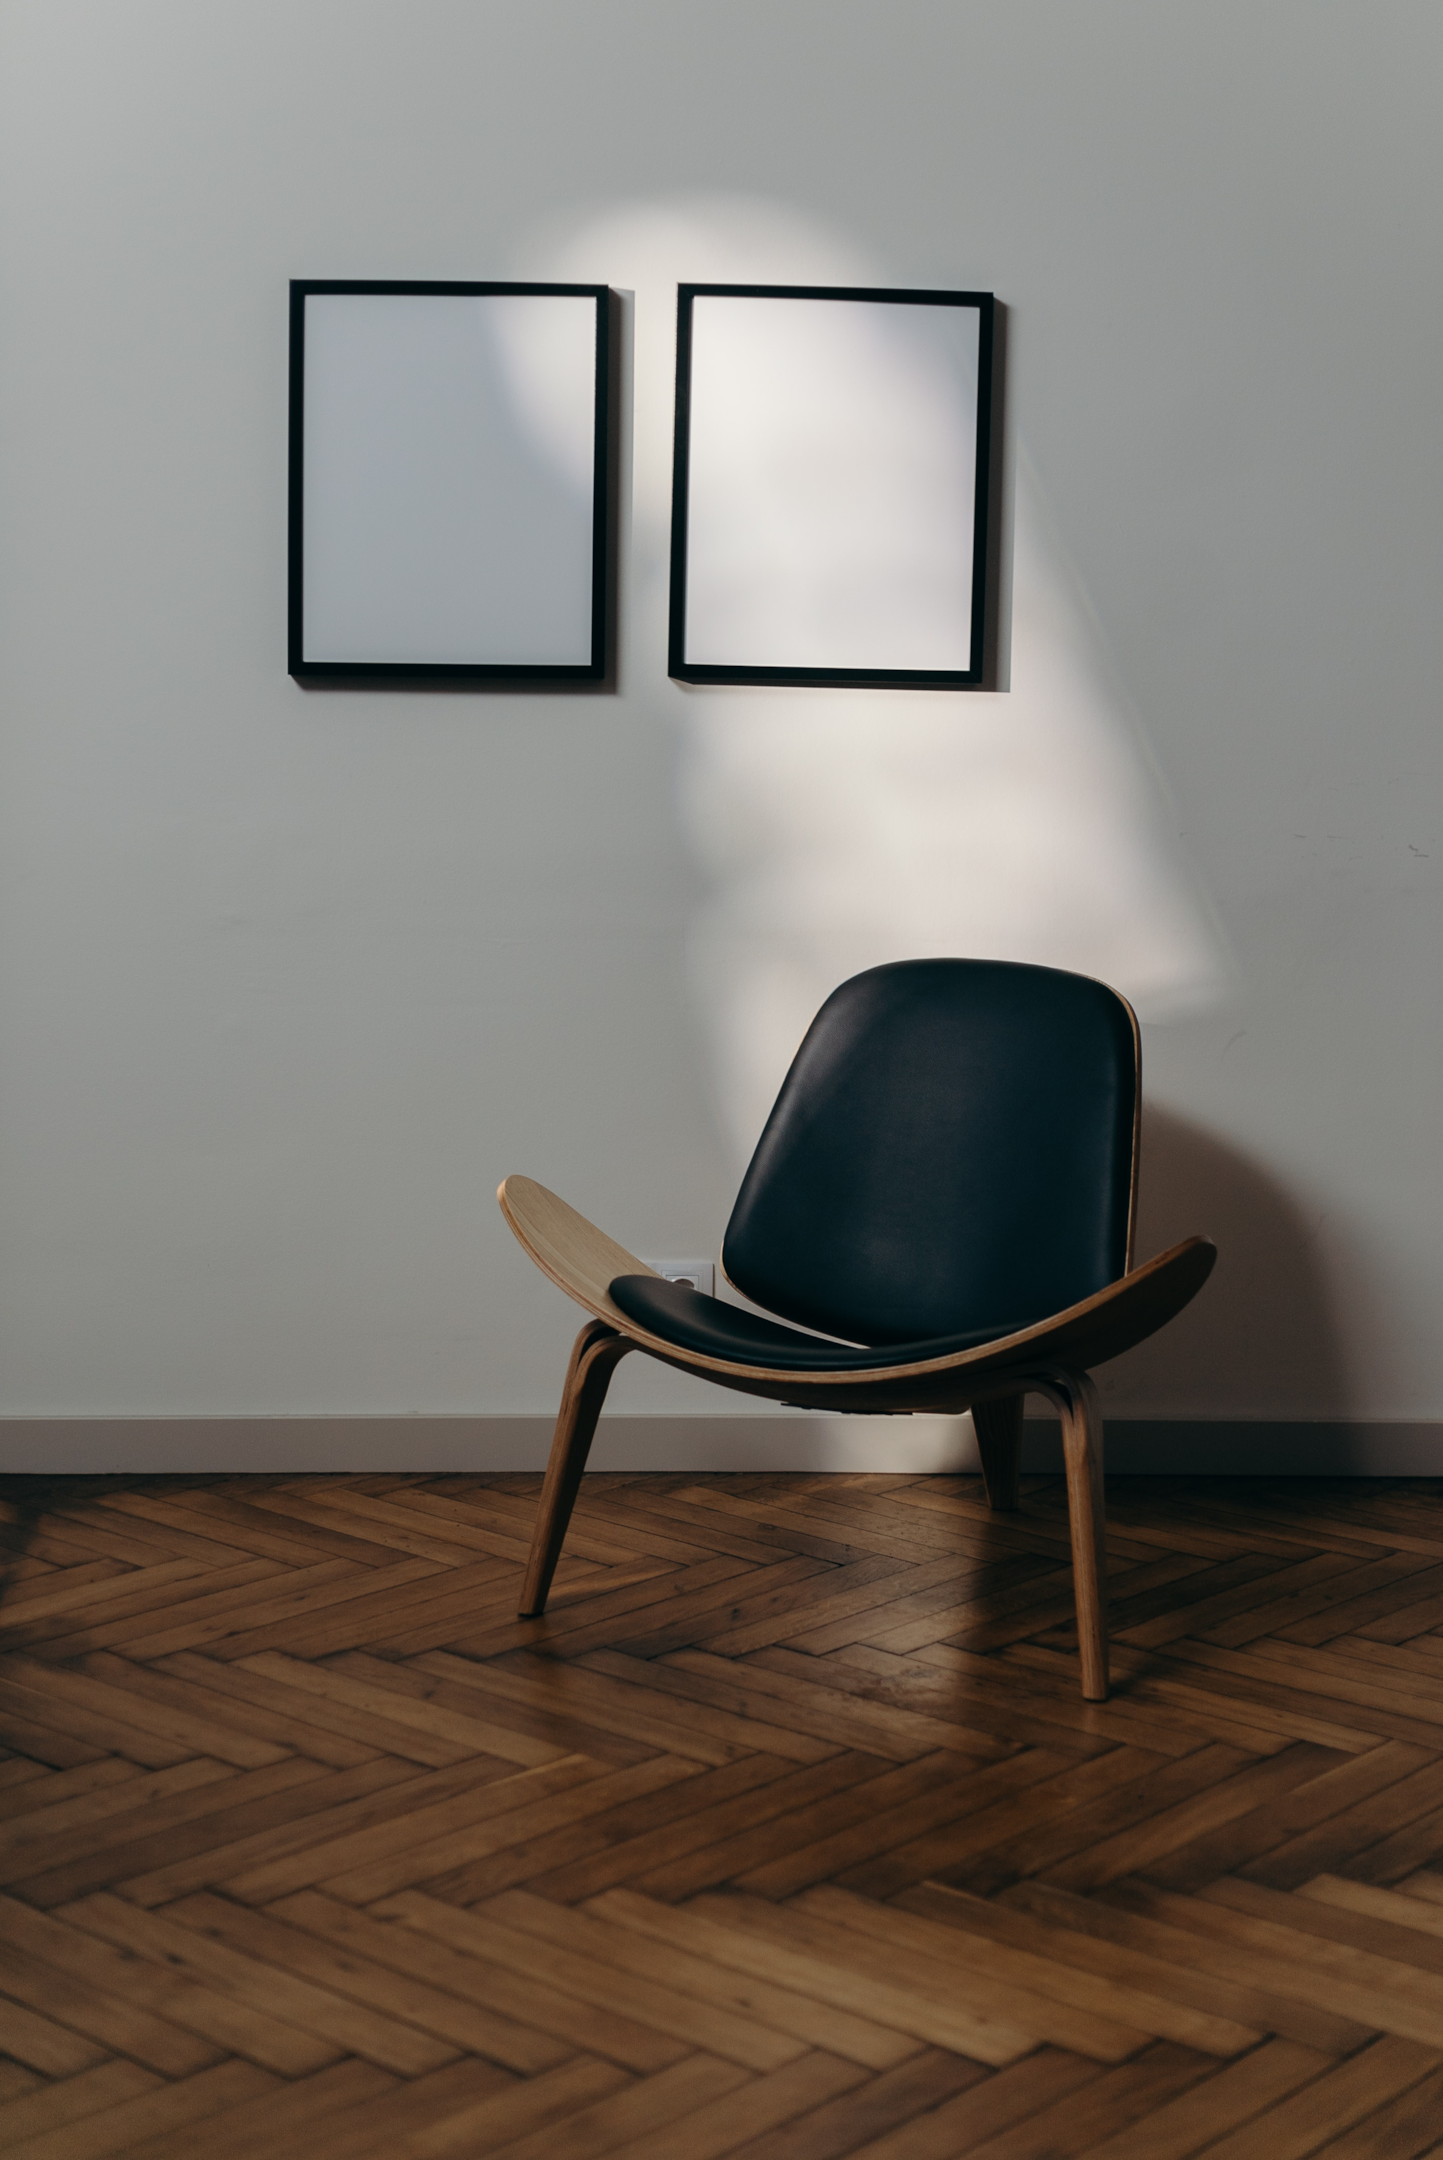 Photo by cottonbro: https://www.pexels.com/photo/black-padded-brown-wooden-chair-4067756/